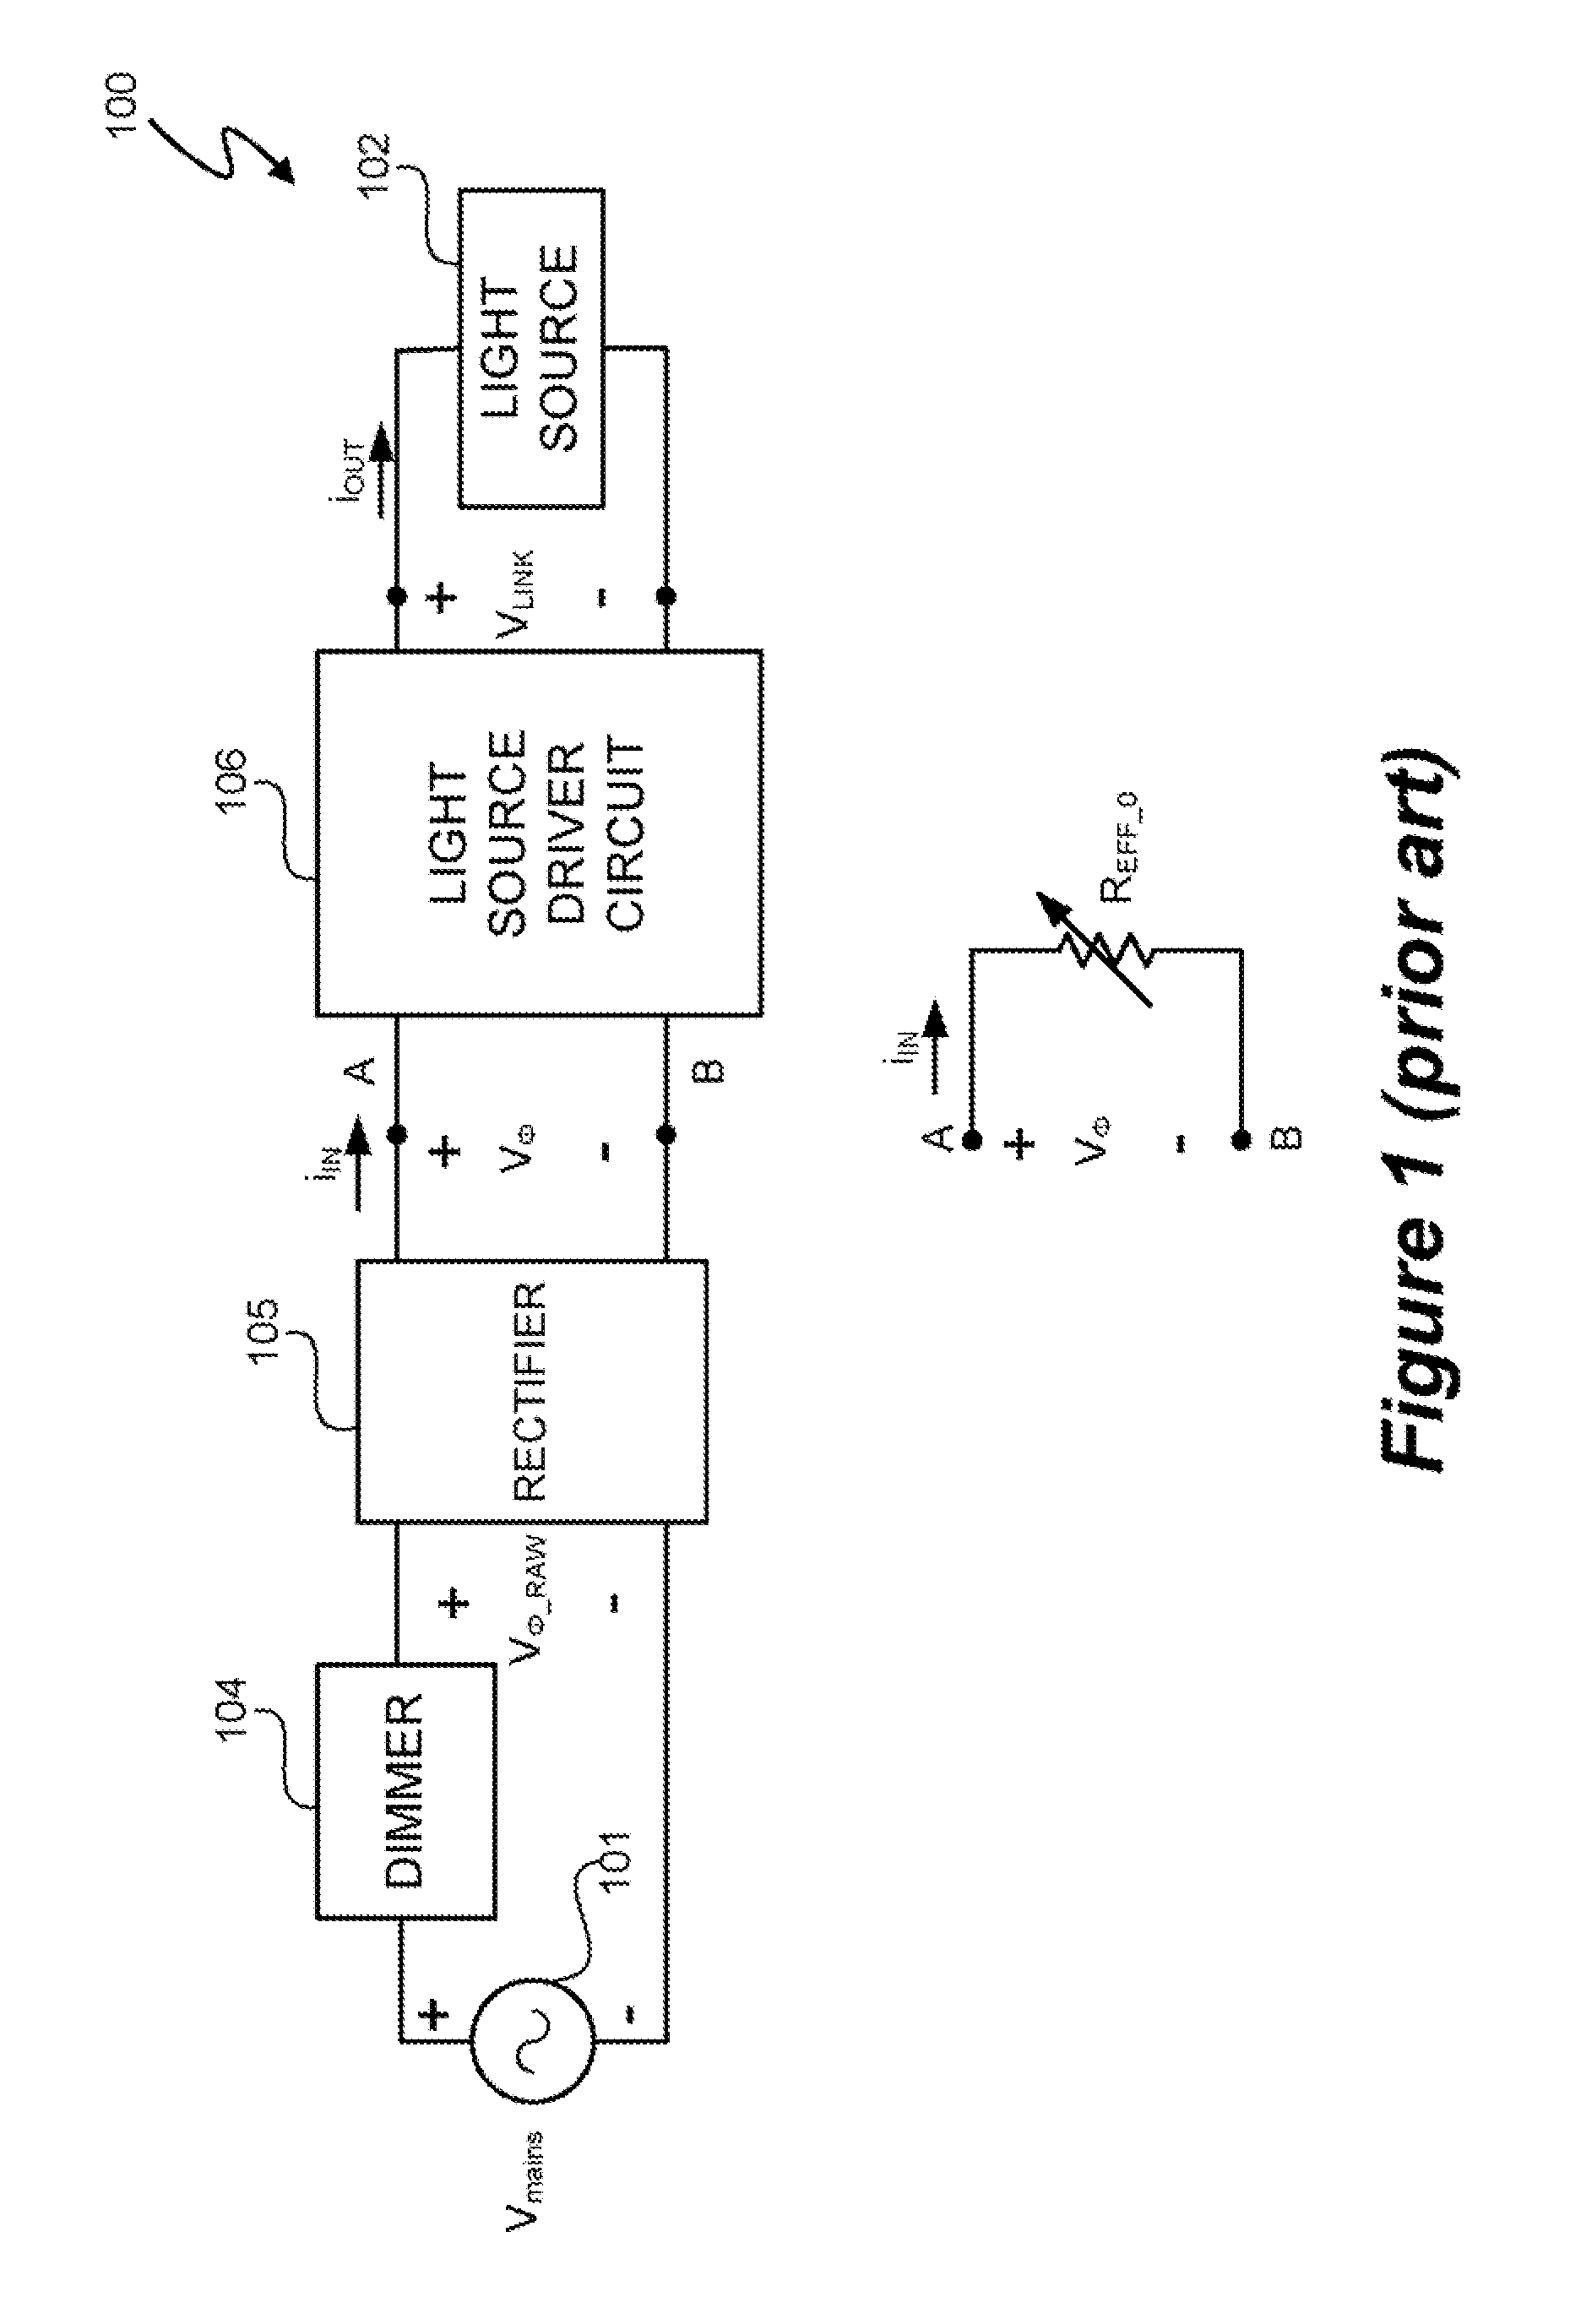 Lighting System With Power Factor Correction Control Data Determined From A Phase Modulated Signal